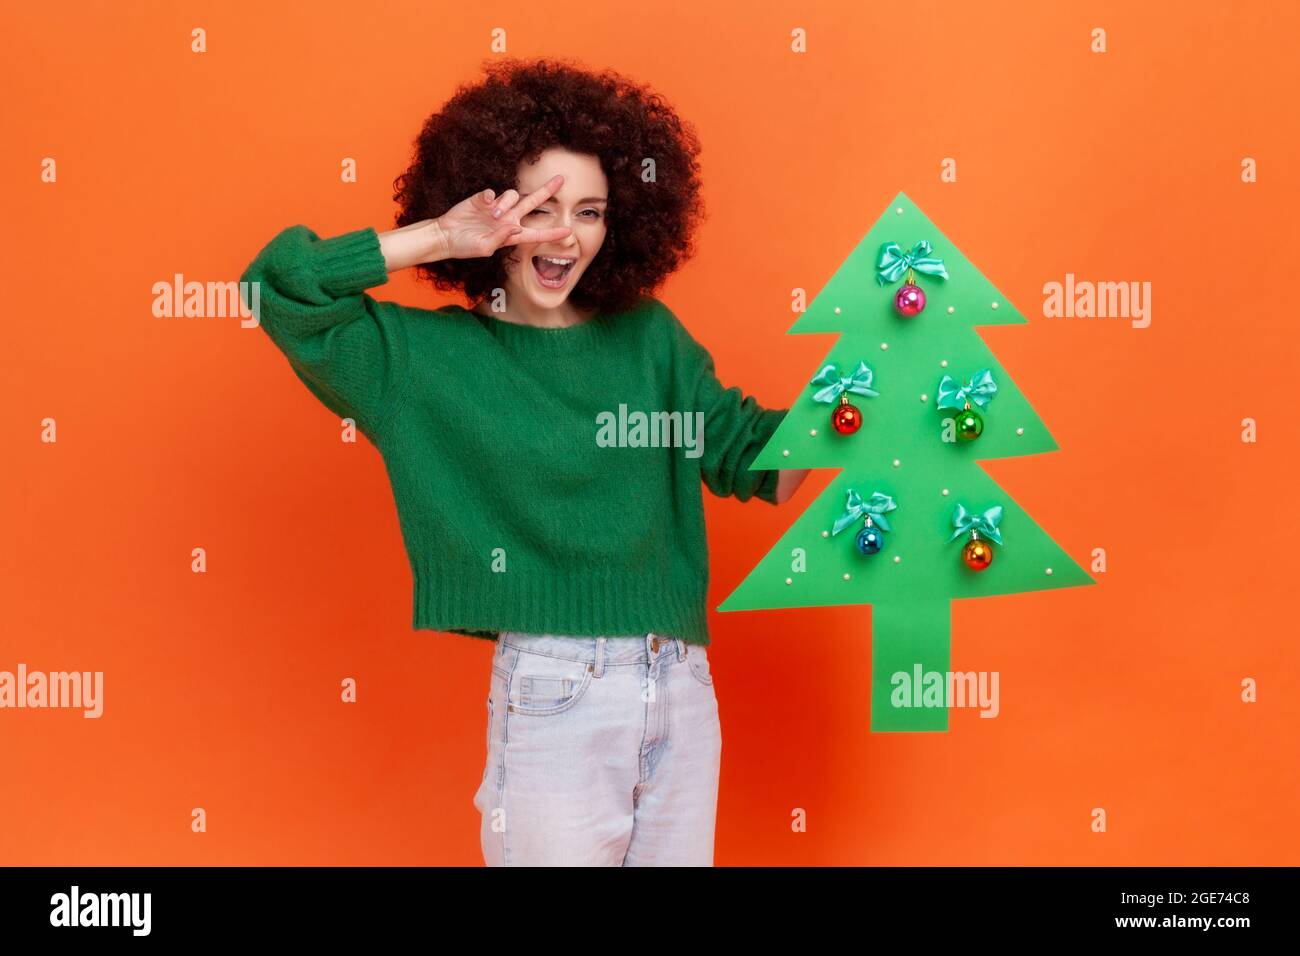 Portrait of positive woman with Afro hairstyle wearing green casual style sweater holding paper christmas tree and showing v sign, happy expression. I Stock Photo